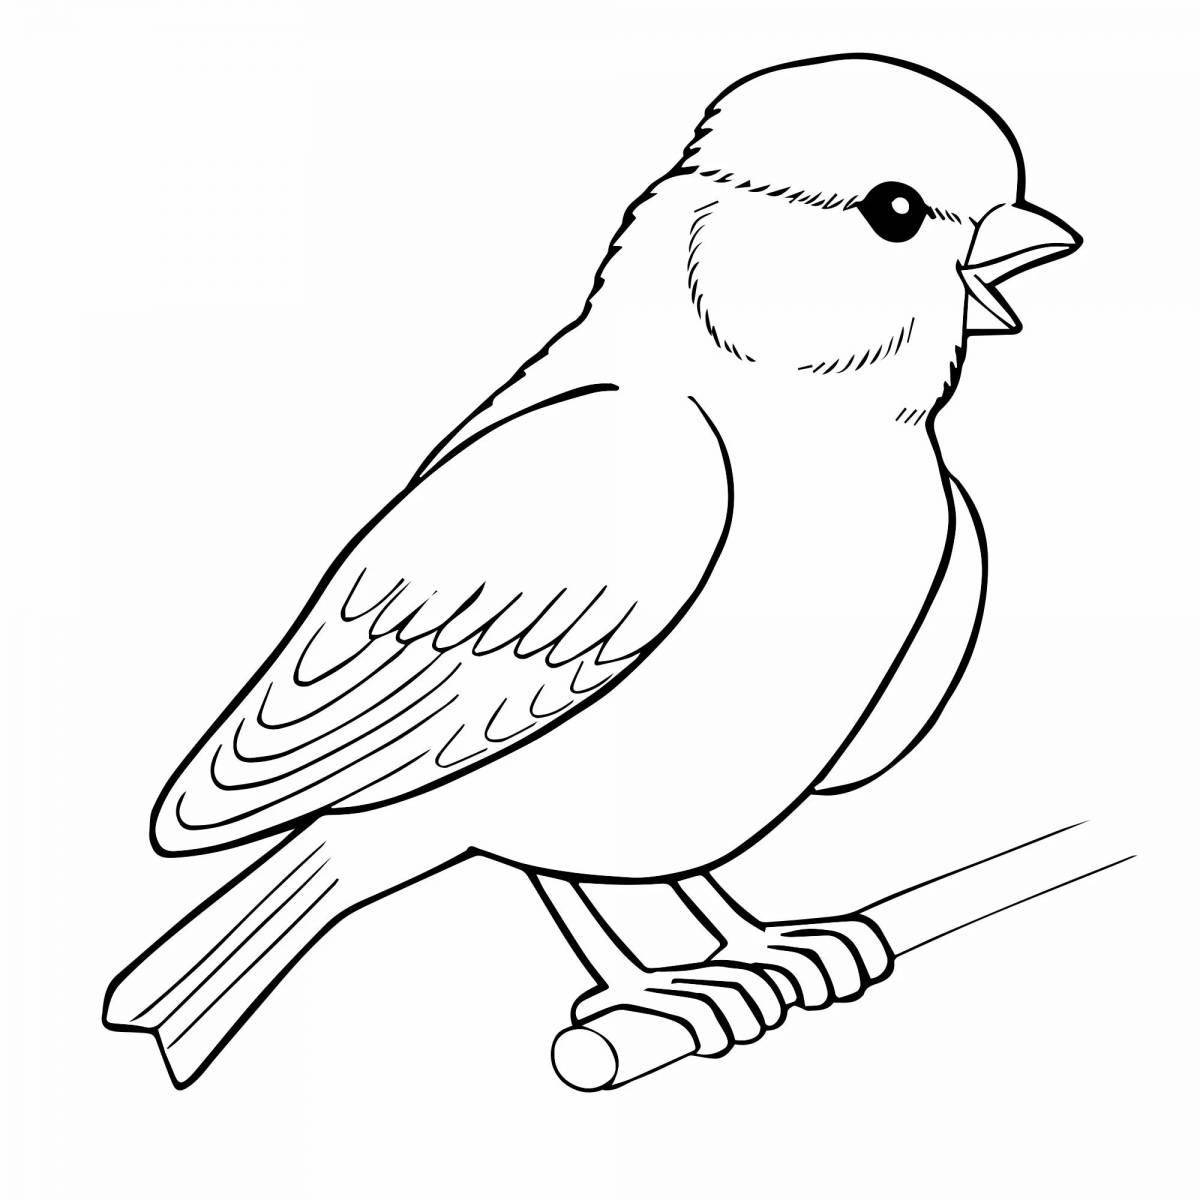 Sparrow fun coloring book for kids